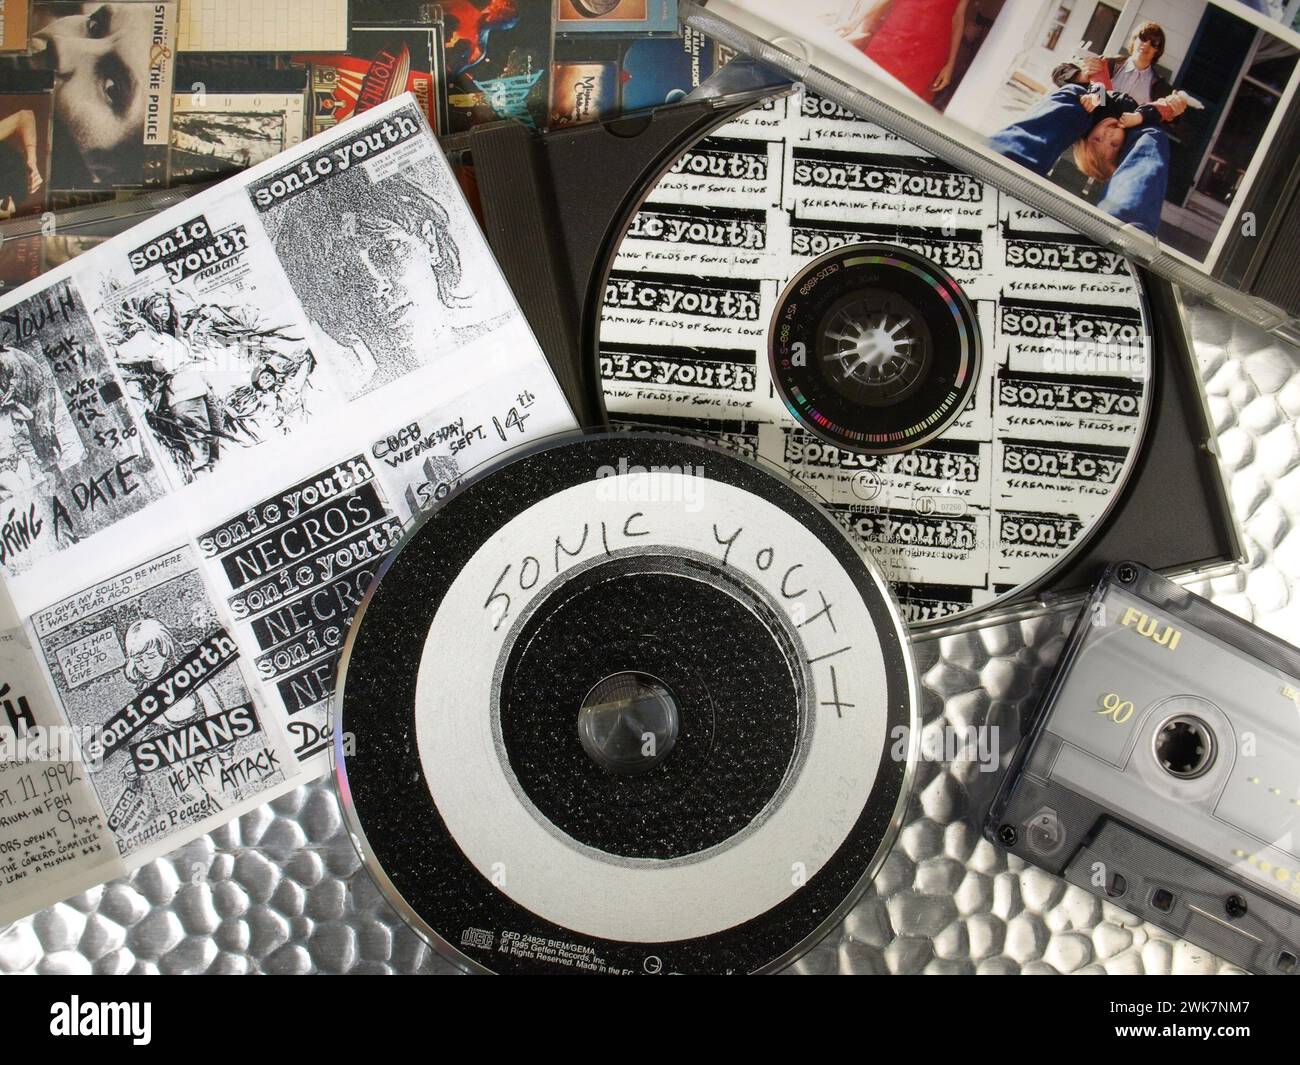 Music Exhibition - Sonic Youth CD - American Rock Band, New York City - Hammered Aluminum Background with CD Covers Stock Photo